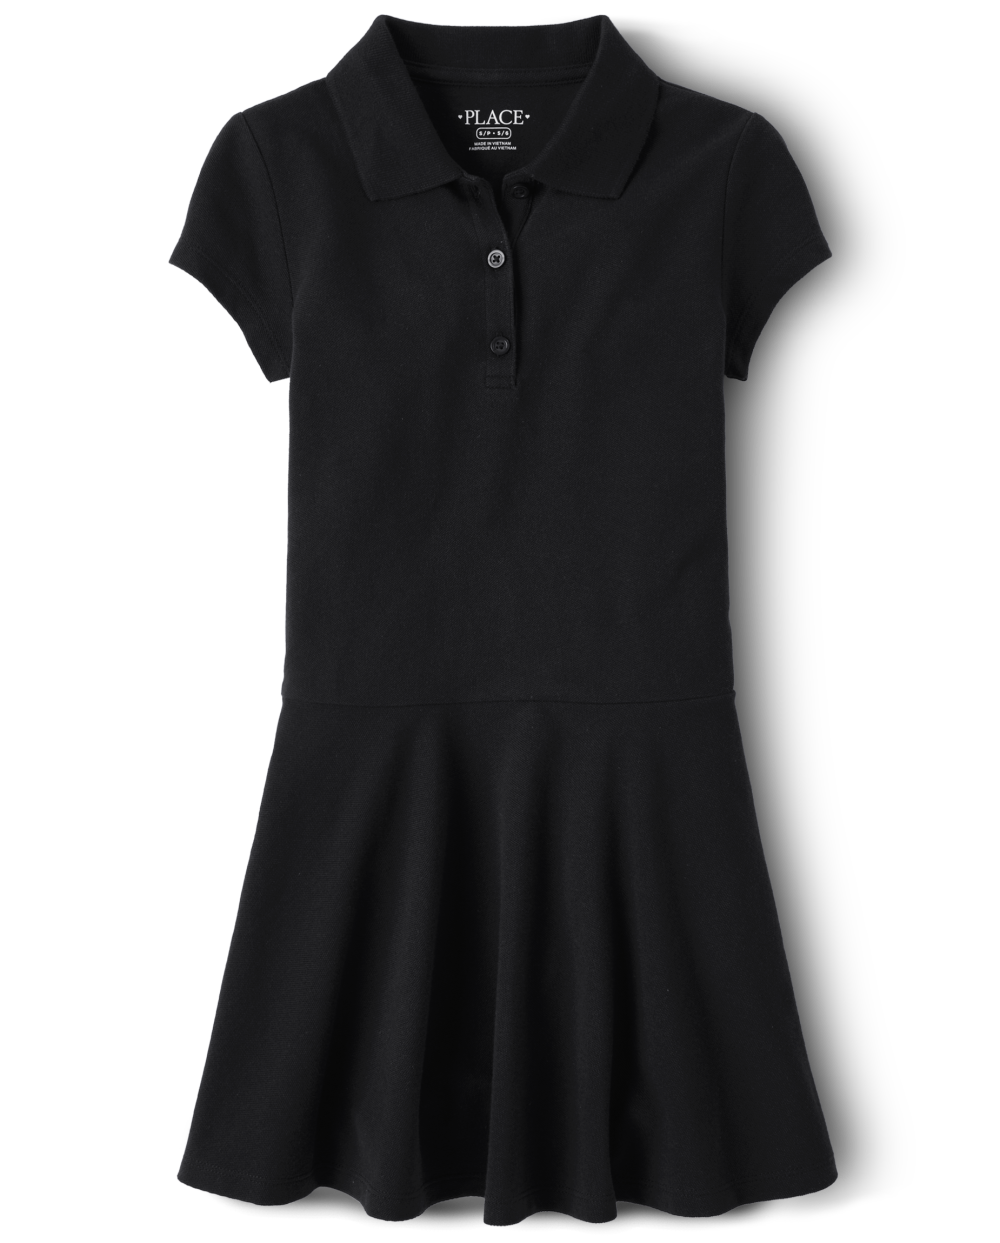 Girls Above the Knee Short Sleeves Sleeves Collared Dress